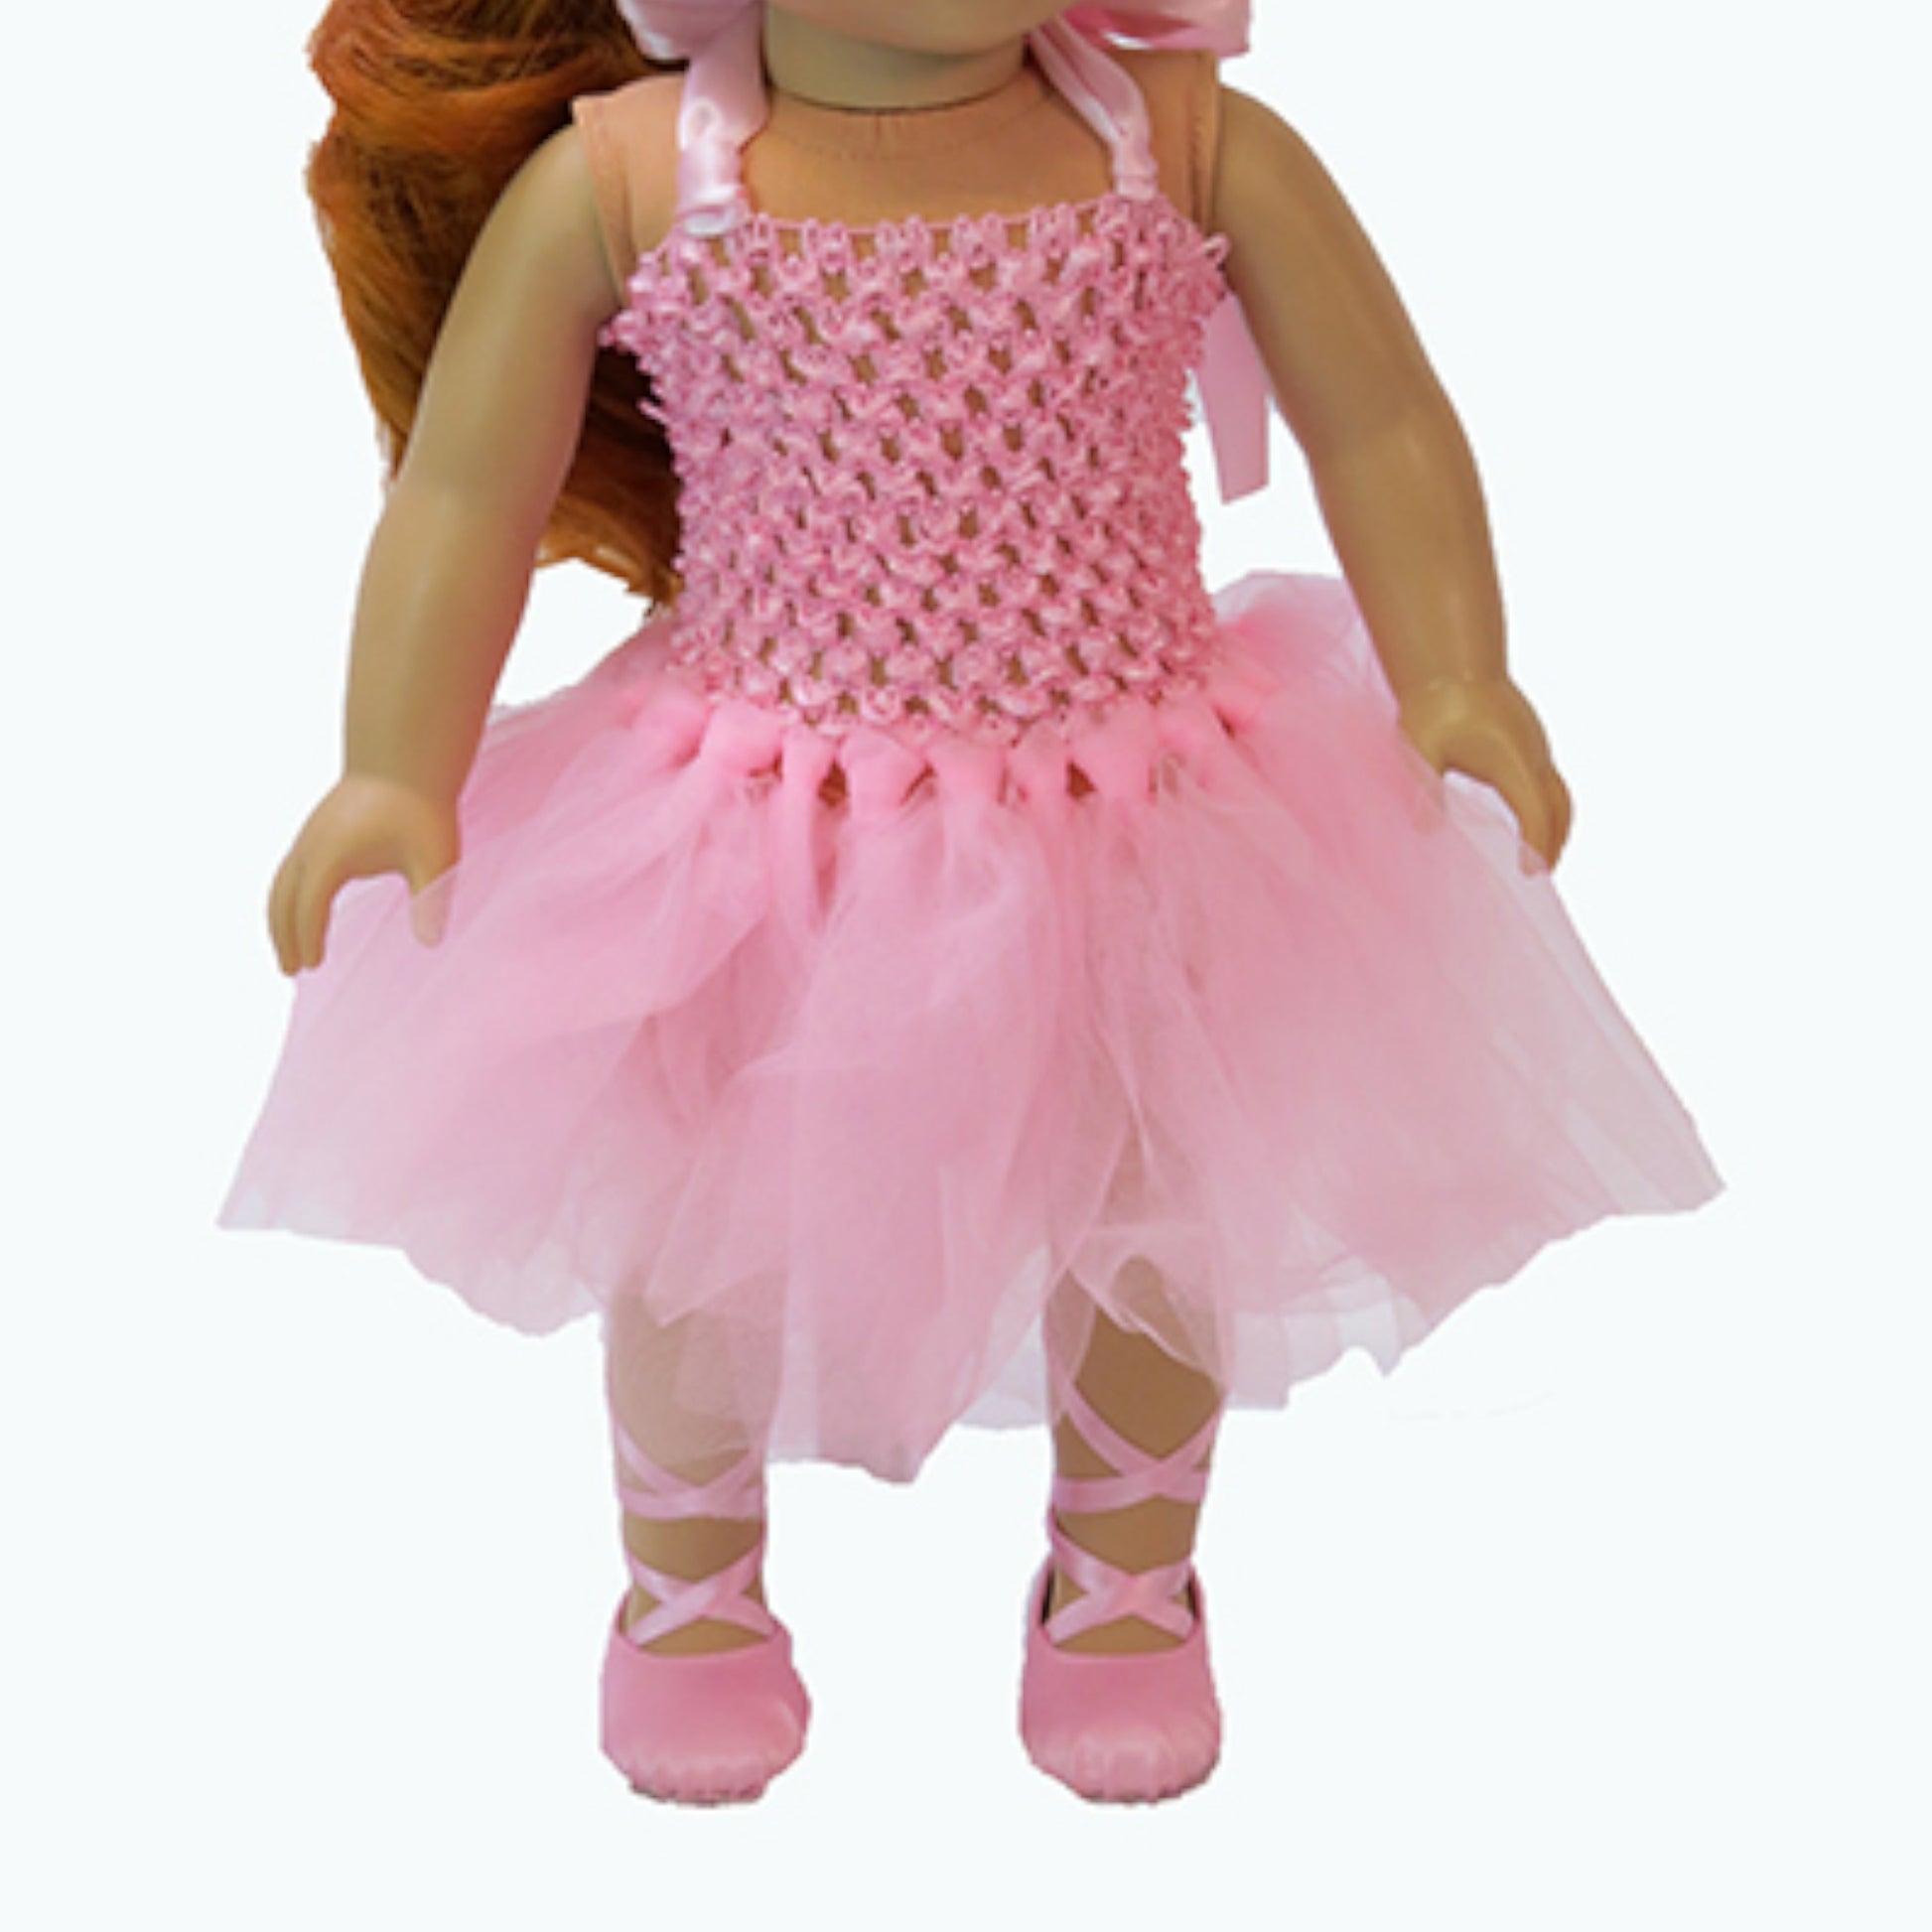 Pink Prima Ballerina Dress for 18-inch dolls with doll